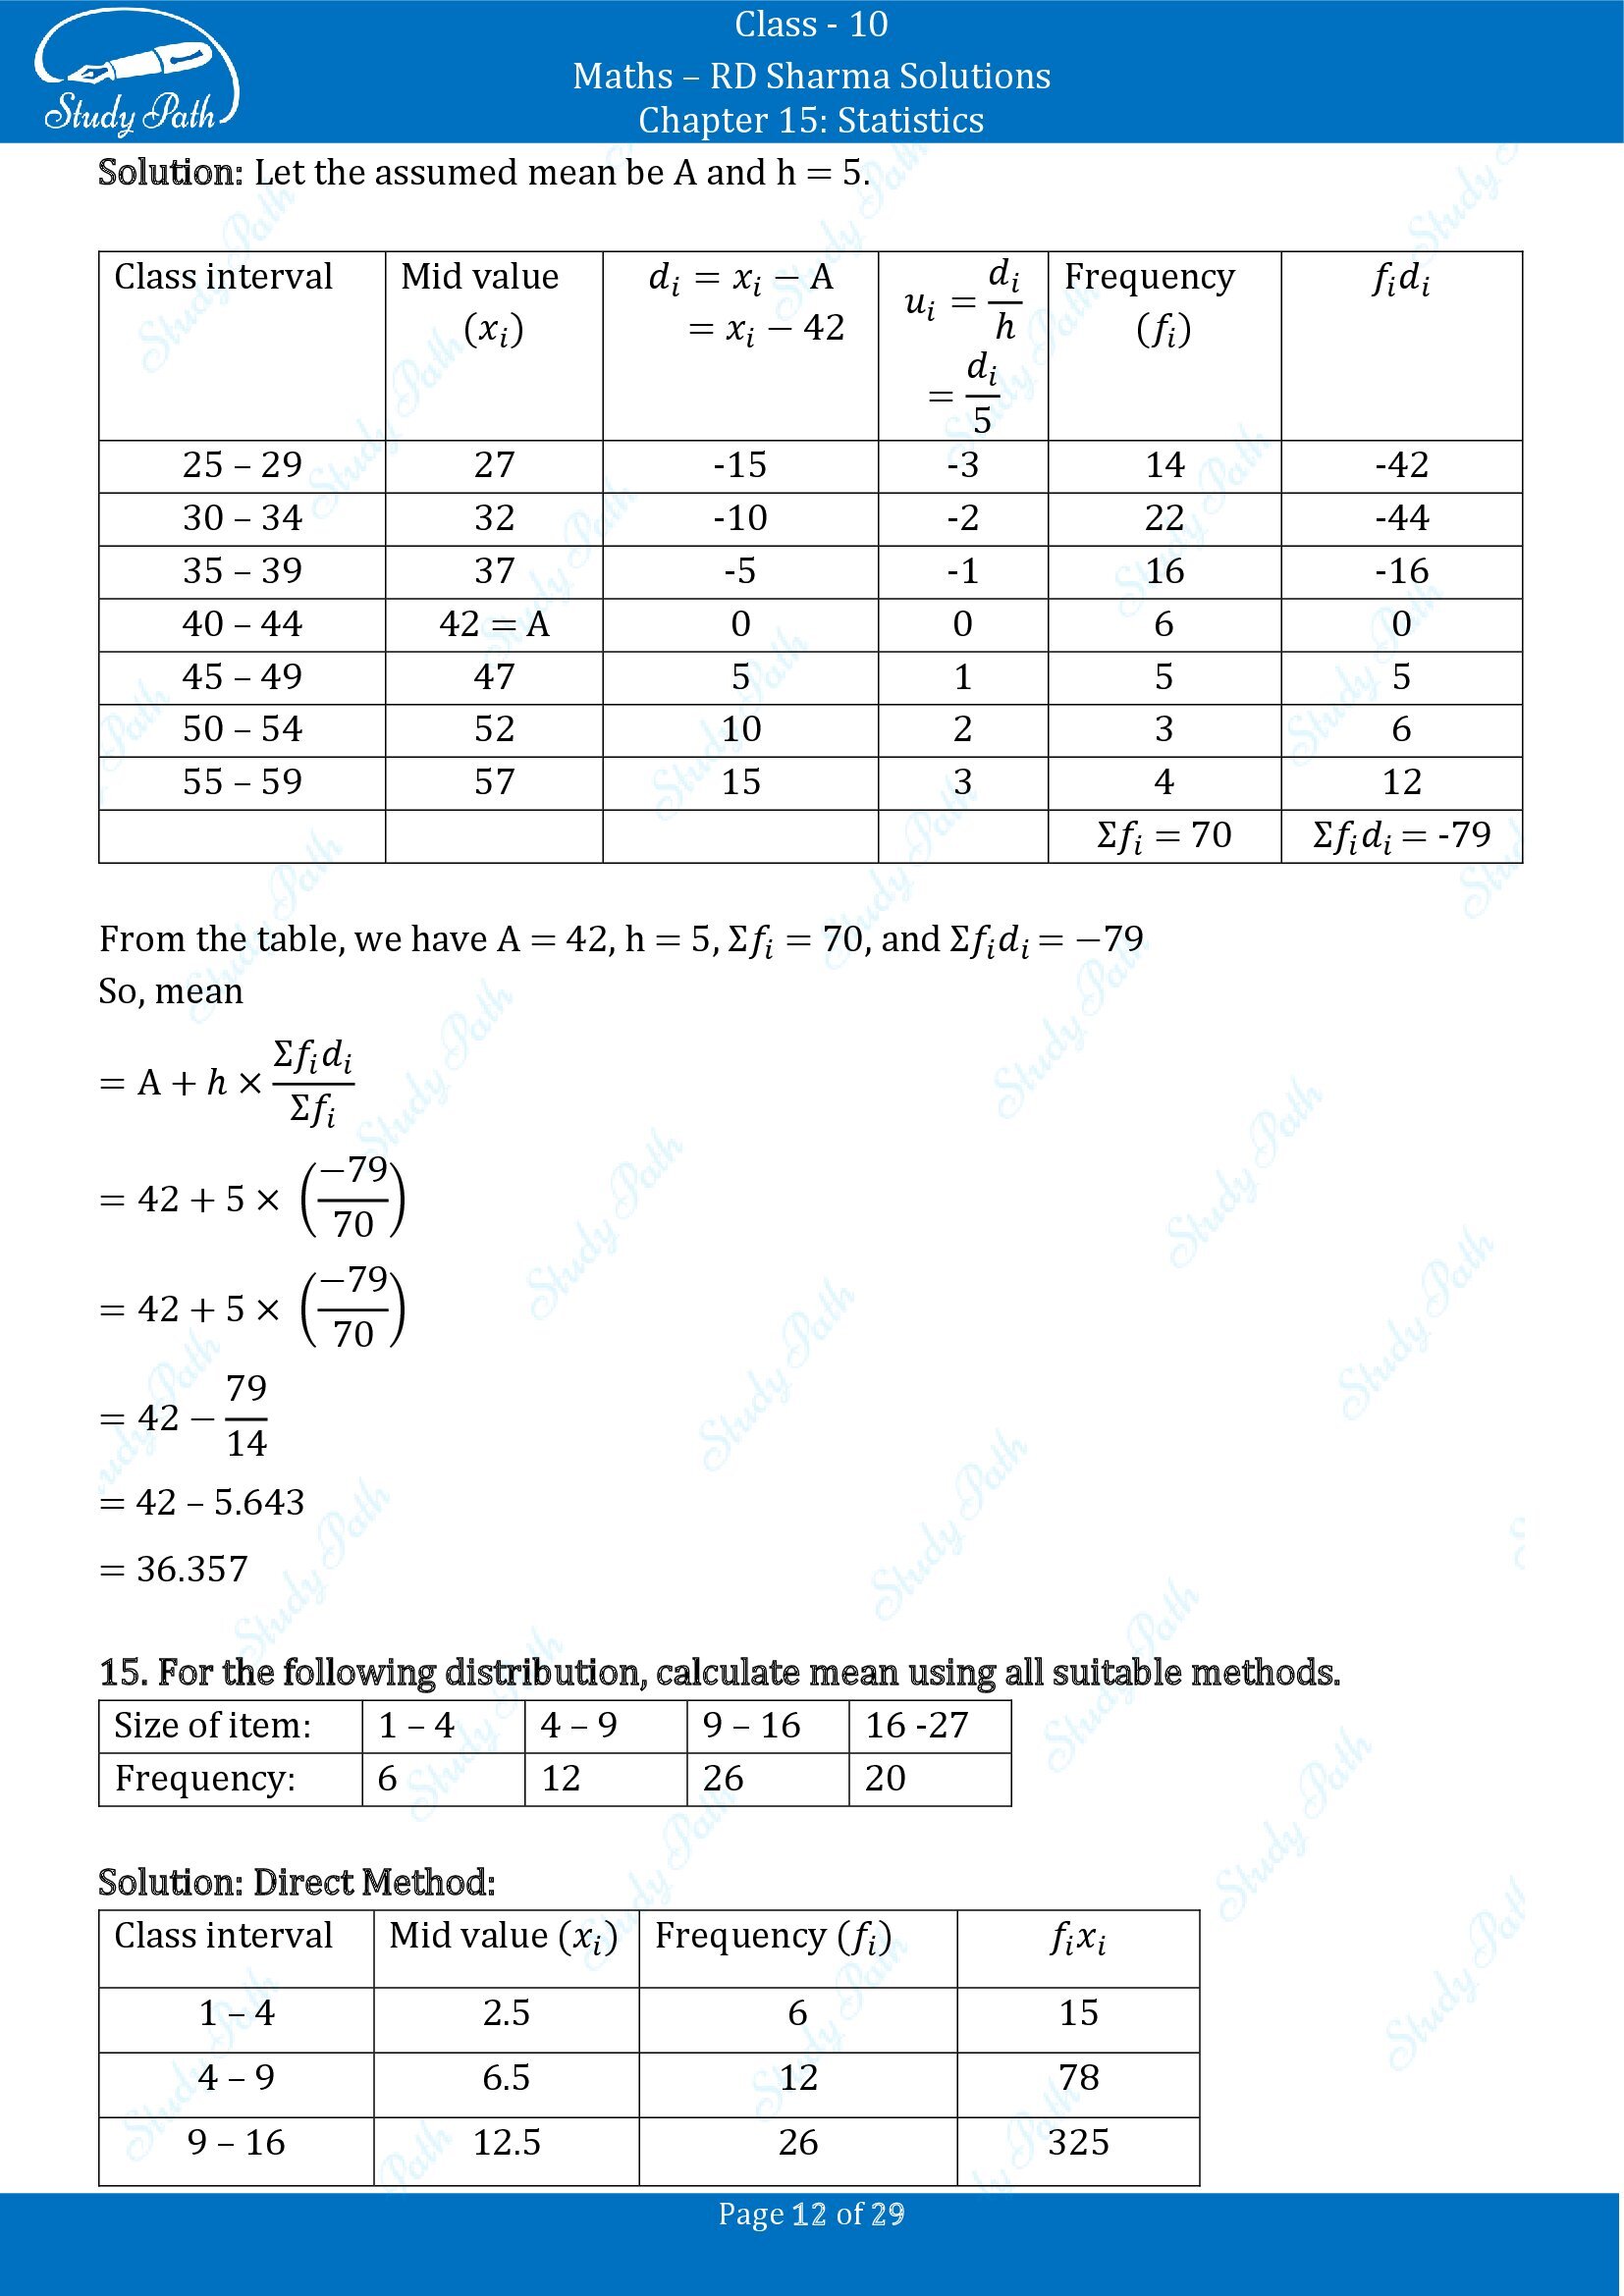 RD Sharma Solutions Class 10 Chapter 15 Statistics Exercise 15.3 0012